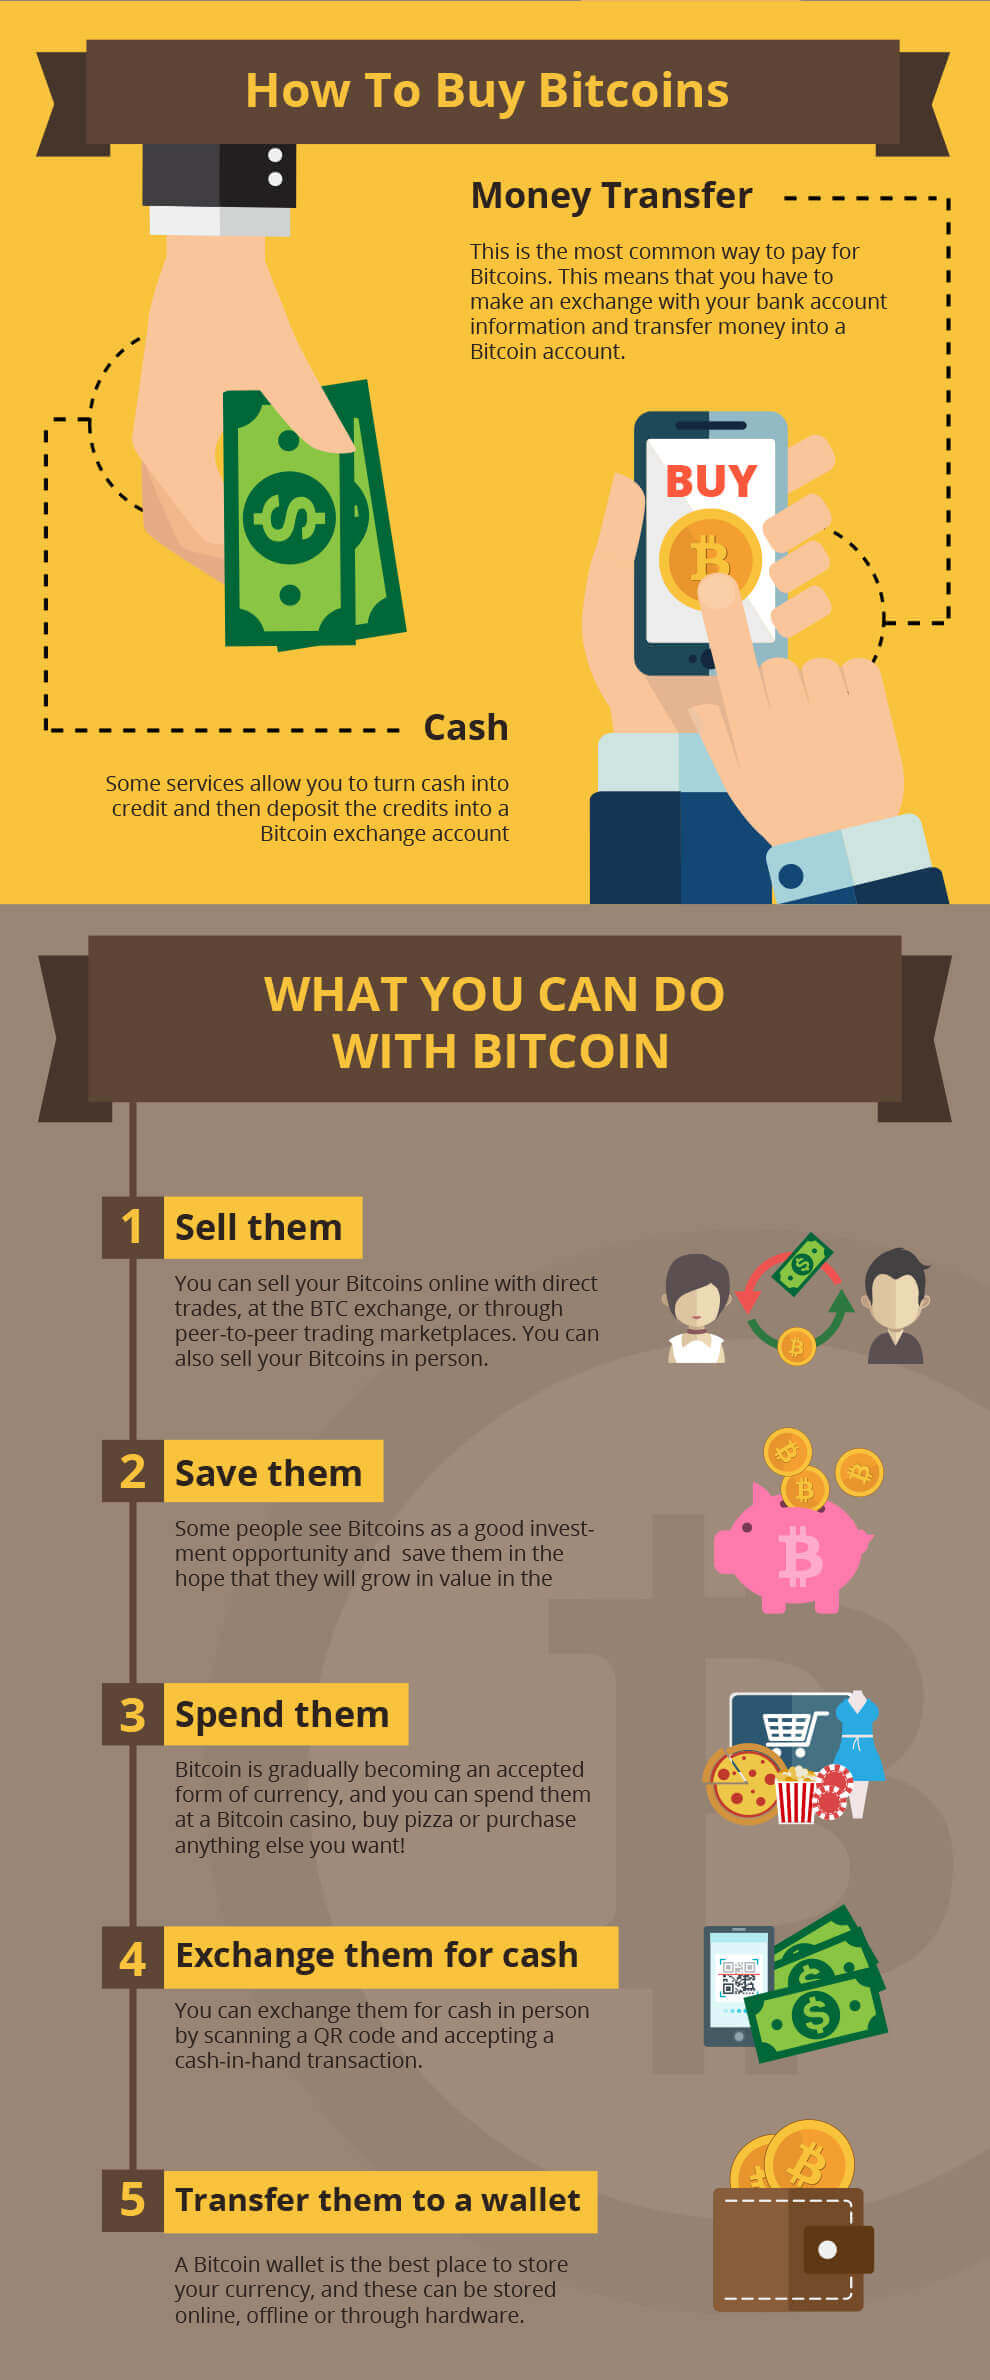 what can you get with bitcoins